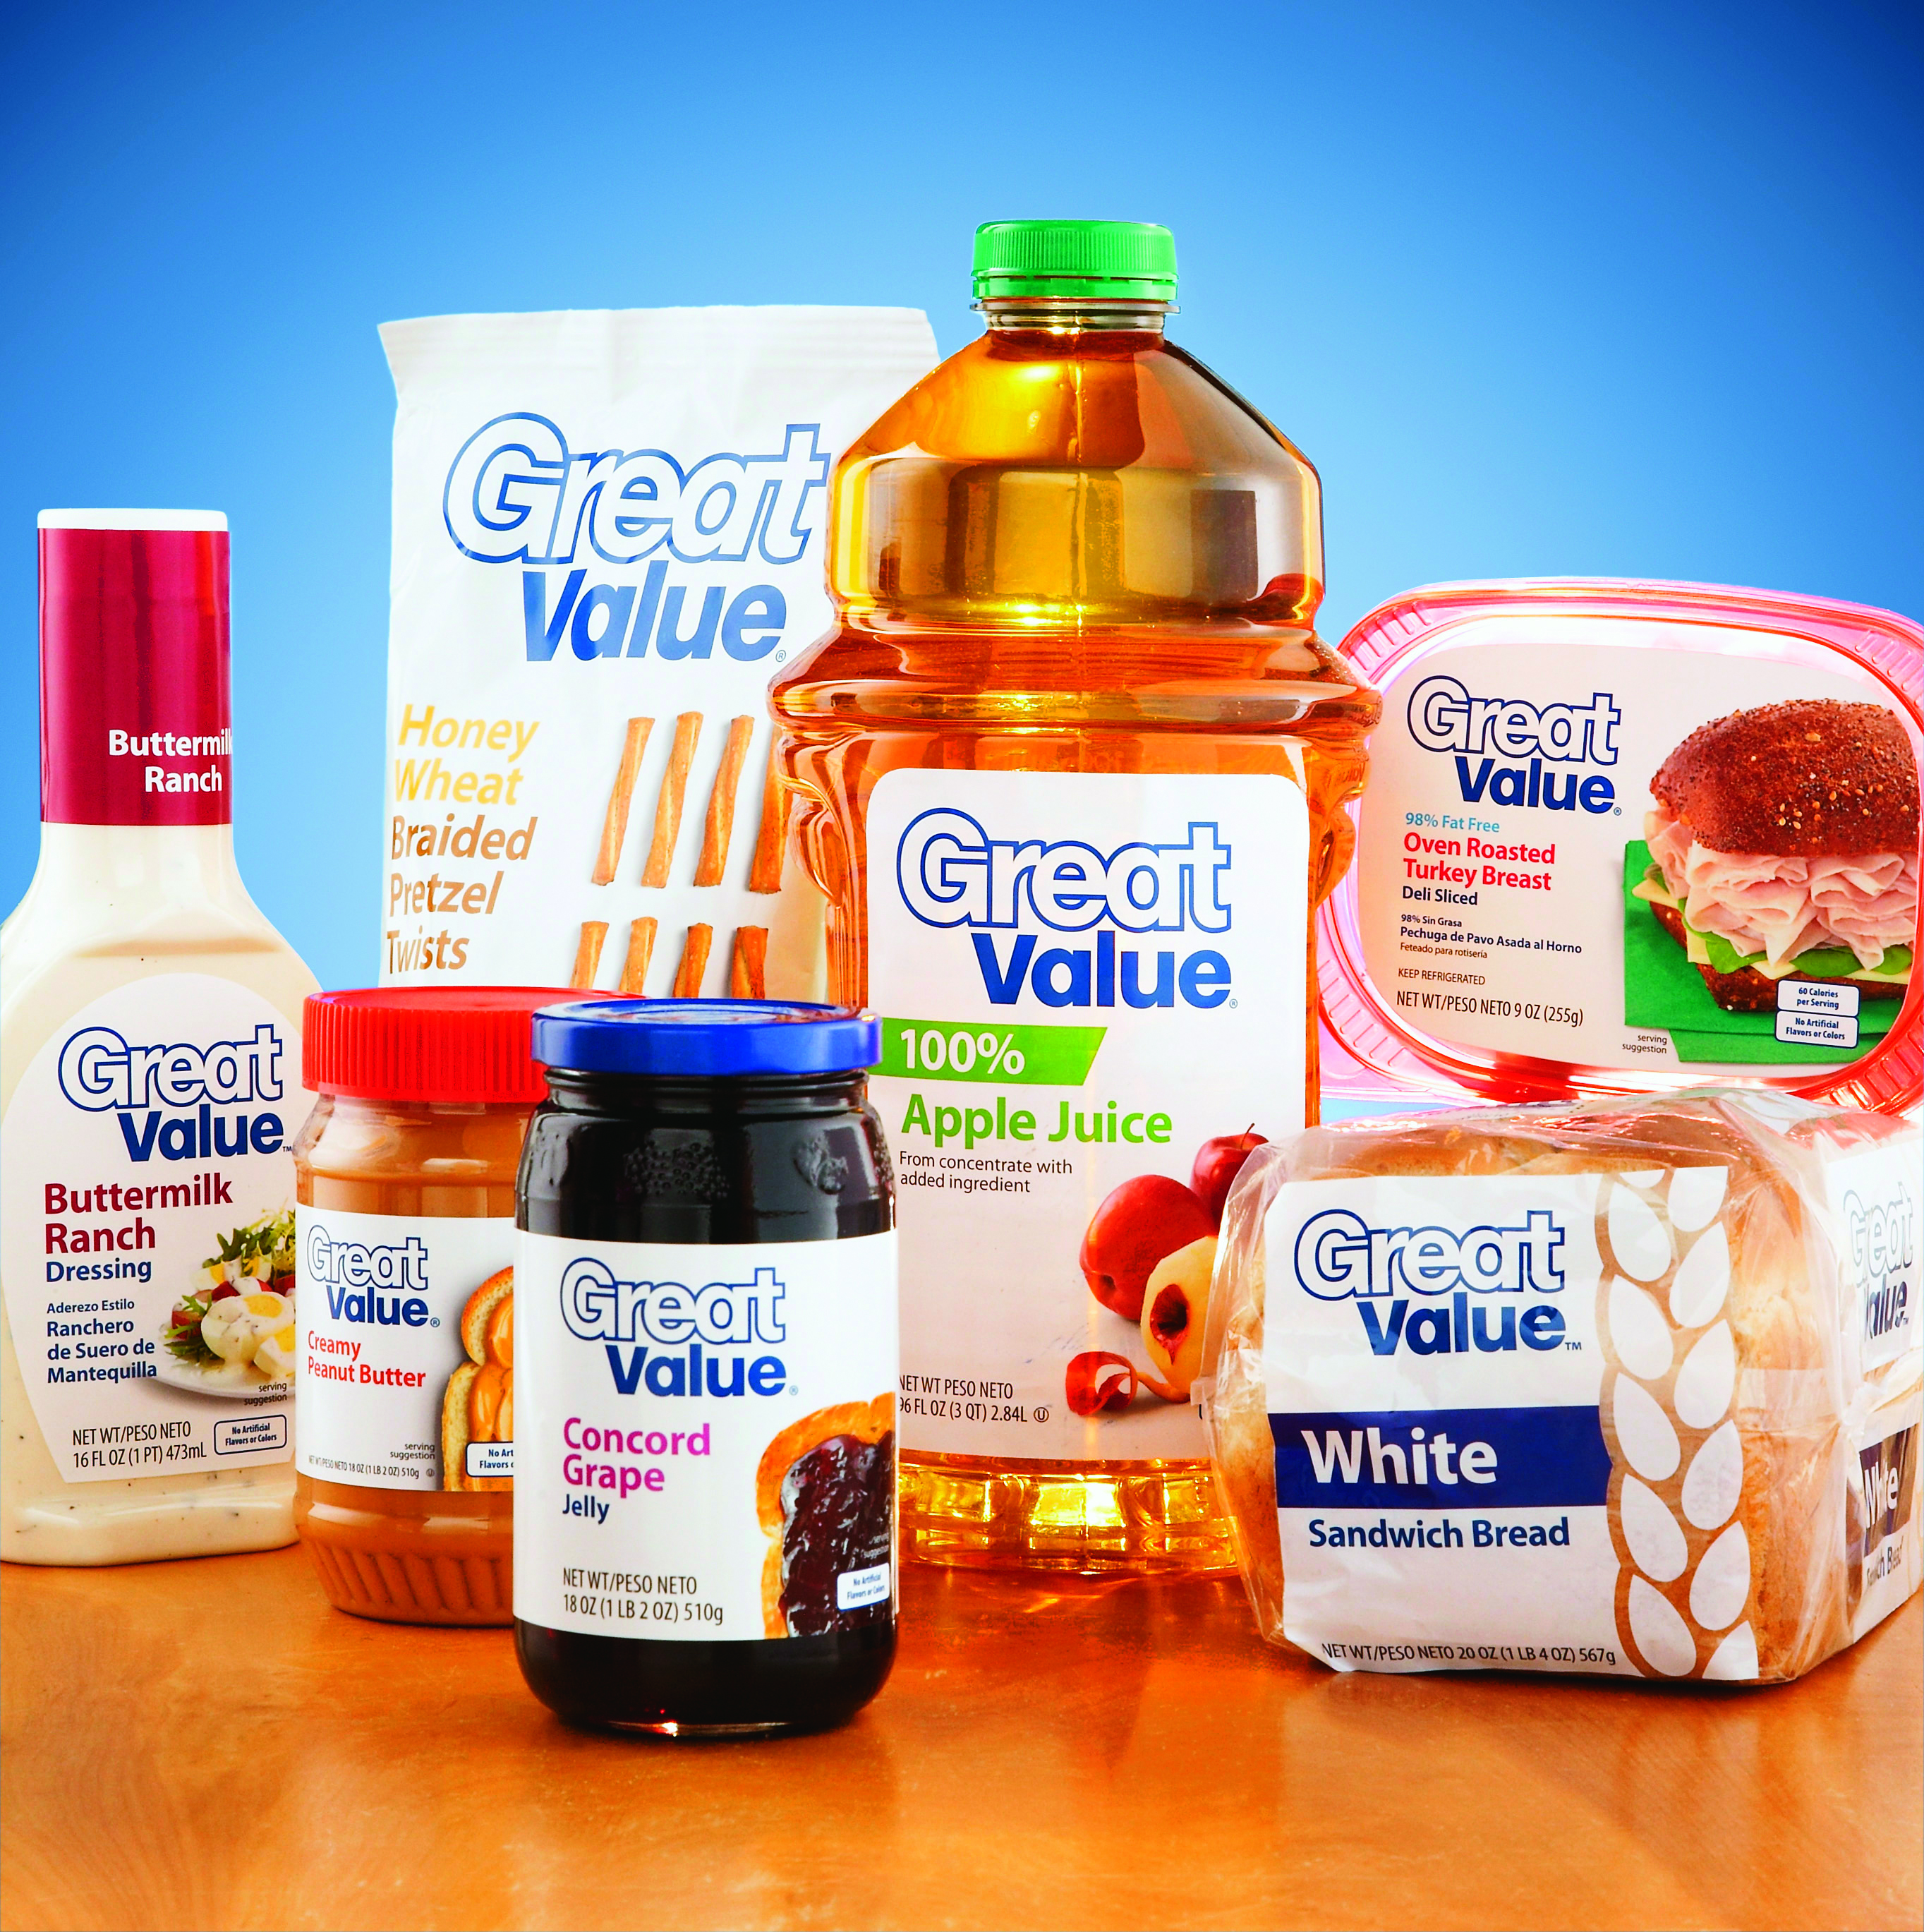 Great products. Private Label упаковка. Great value Walmart. Product Label Design. Product labeling.